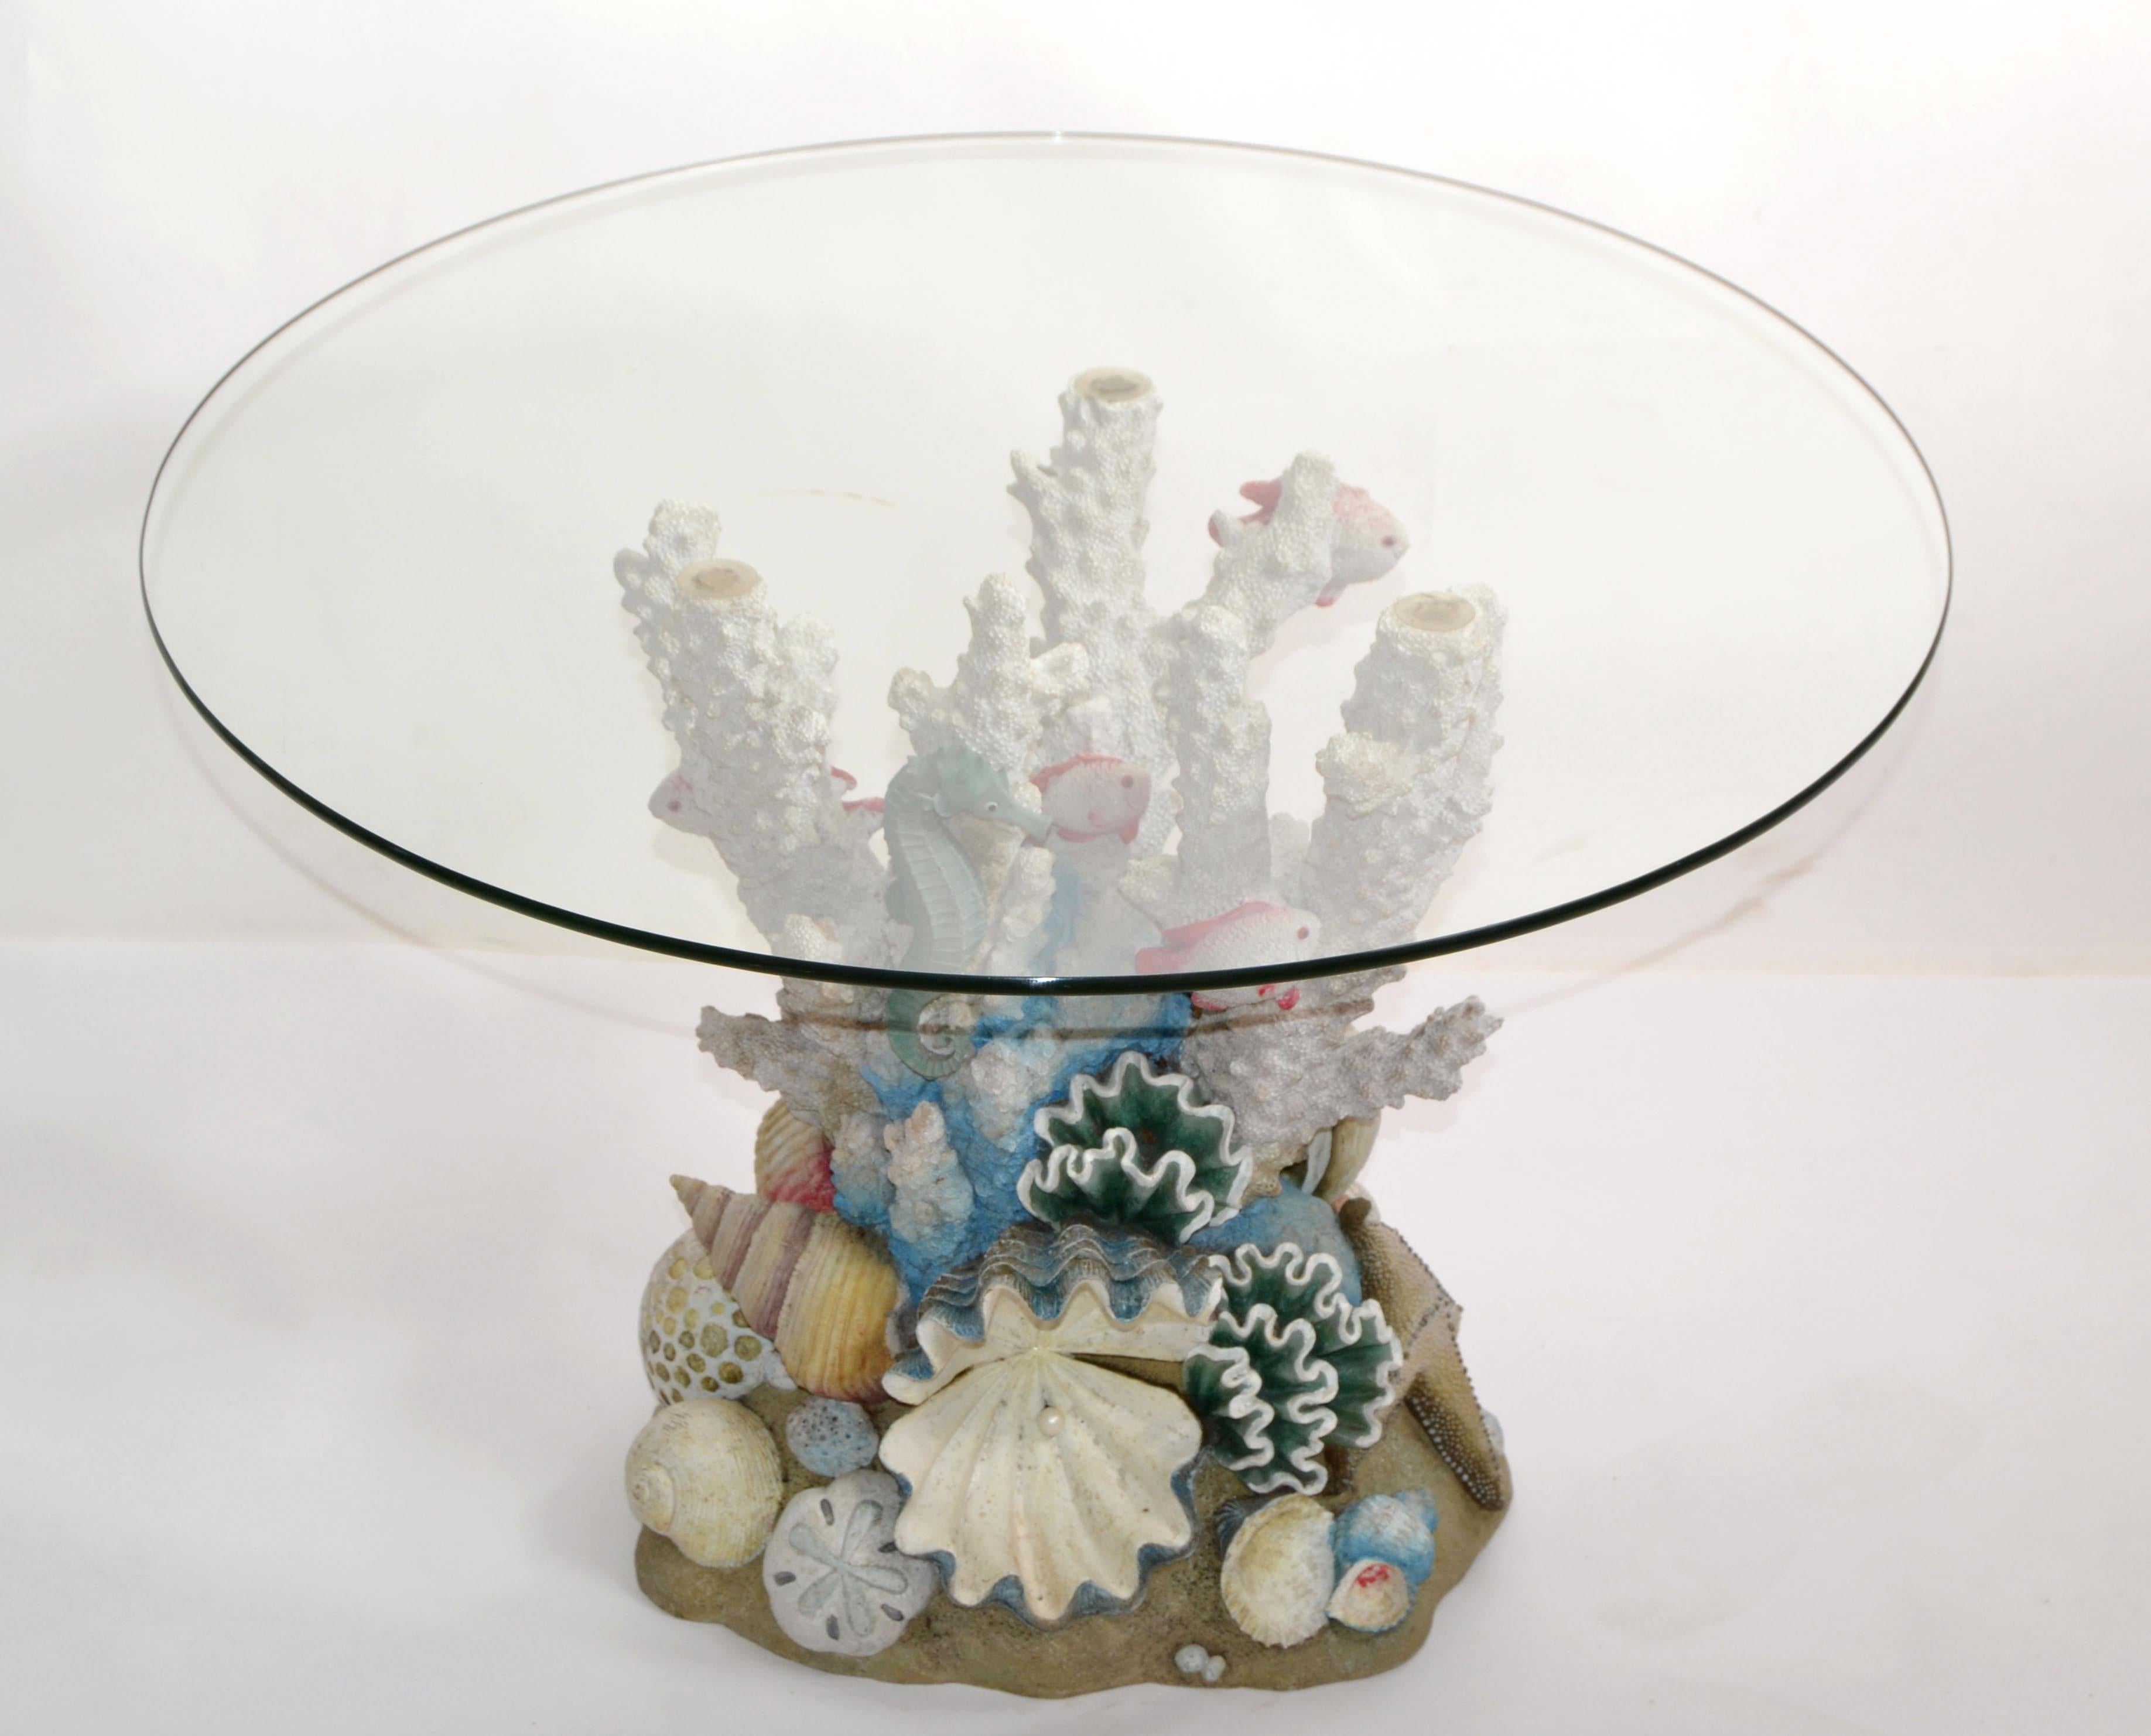 Whimsical nautical coffee or center table in plaster & resin and comes with a 28 inches diameter glass top.
The base depicting an ocean coral with many different aquarium fish, it measures 16 x 12 x 20 inches height.
Very detailed and real looking.